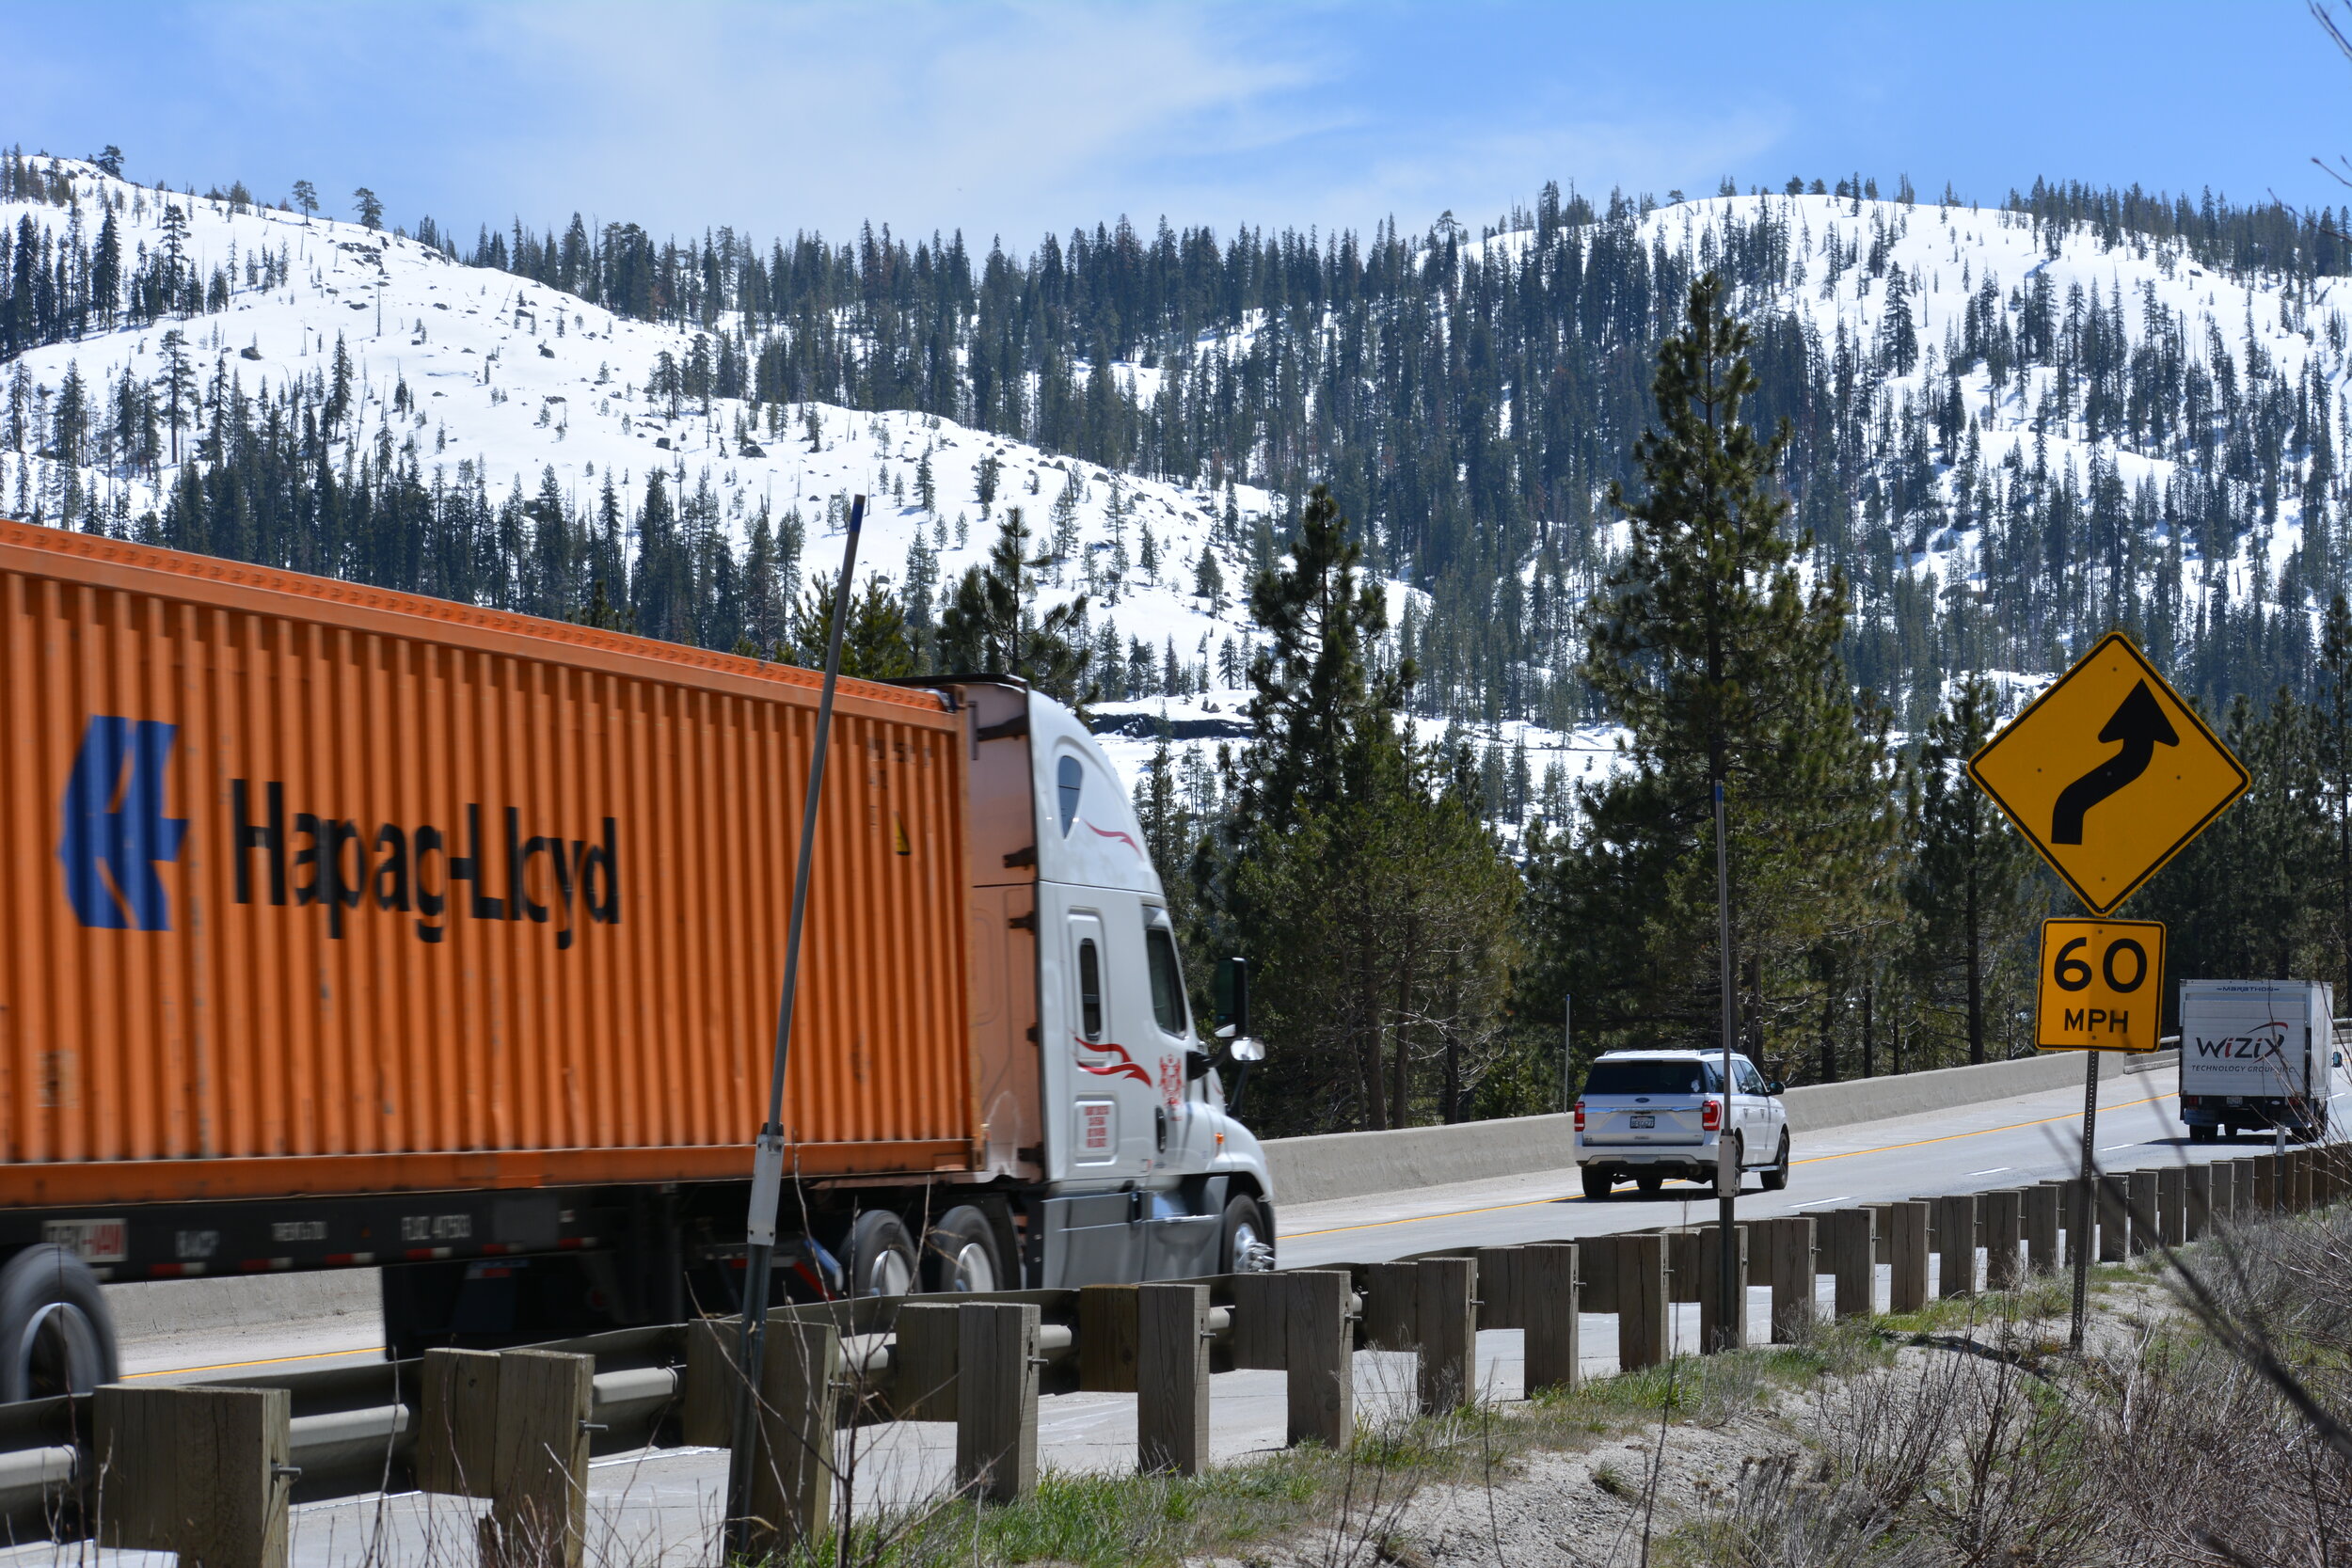  Interstate 80 poses a significant barrier to north-to-south wildlife movement in the Sierra Nevada. We explored priority barriers on the highway in order to identify opportunities for potential infrastructure enhancements that would facilitate safe 